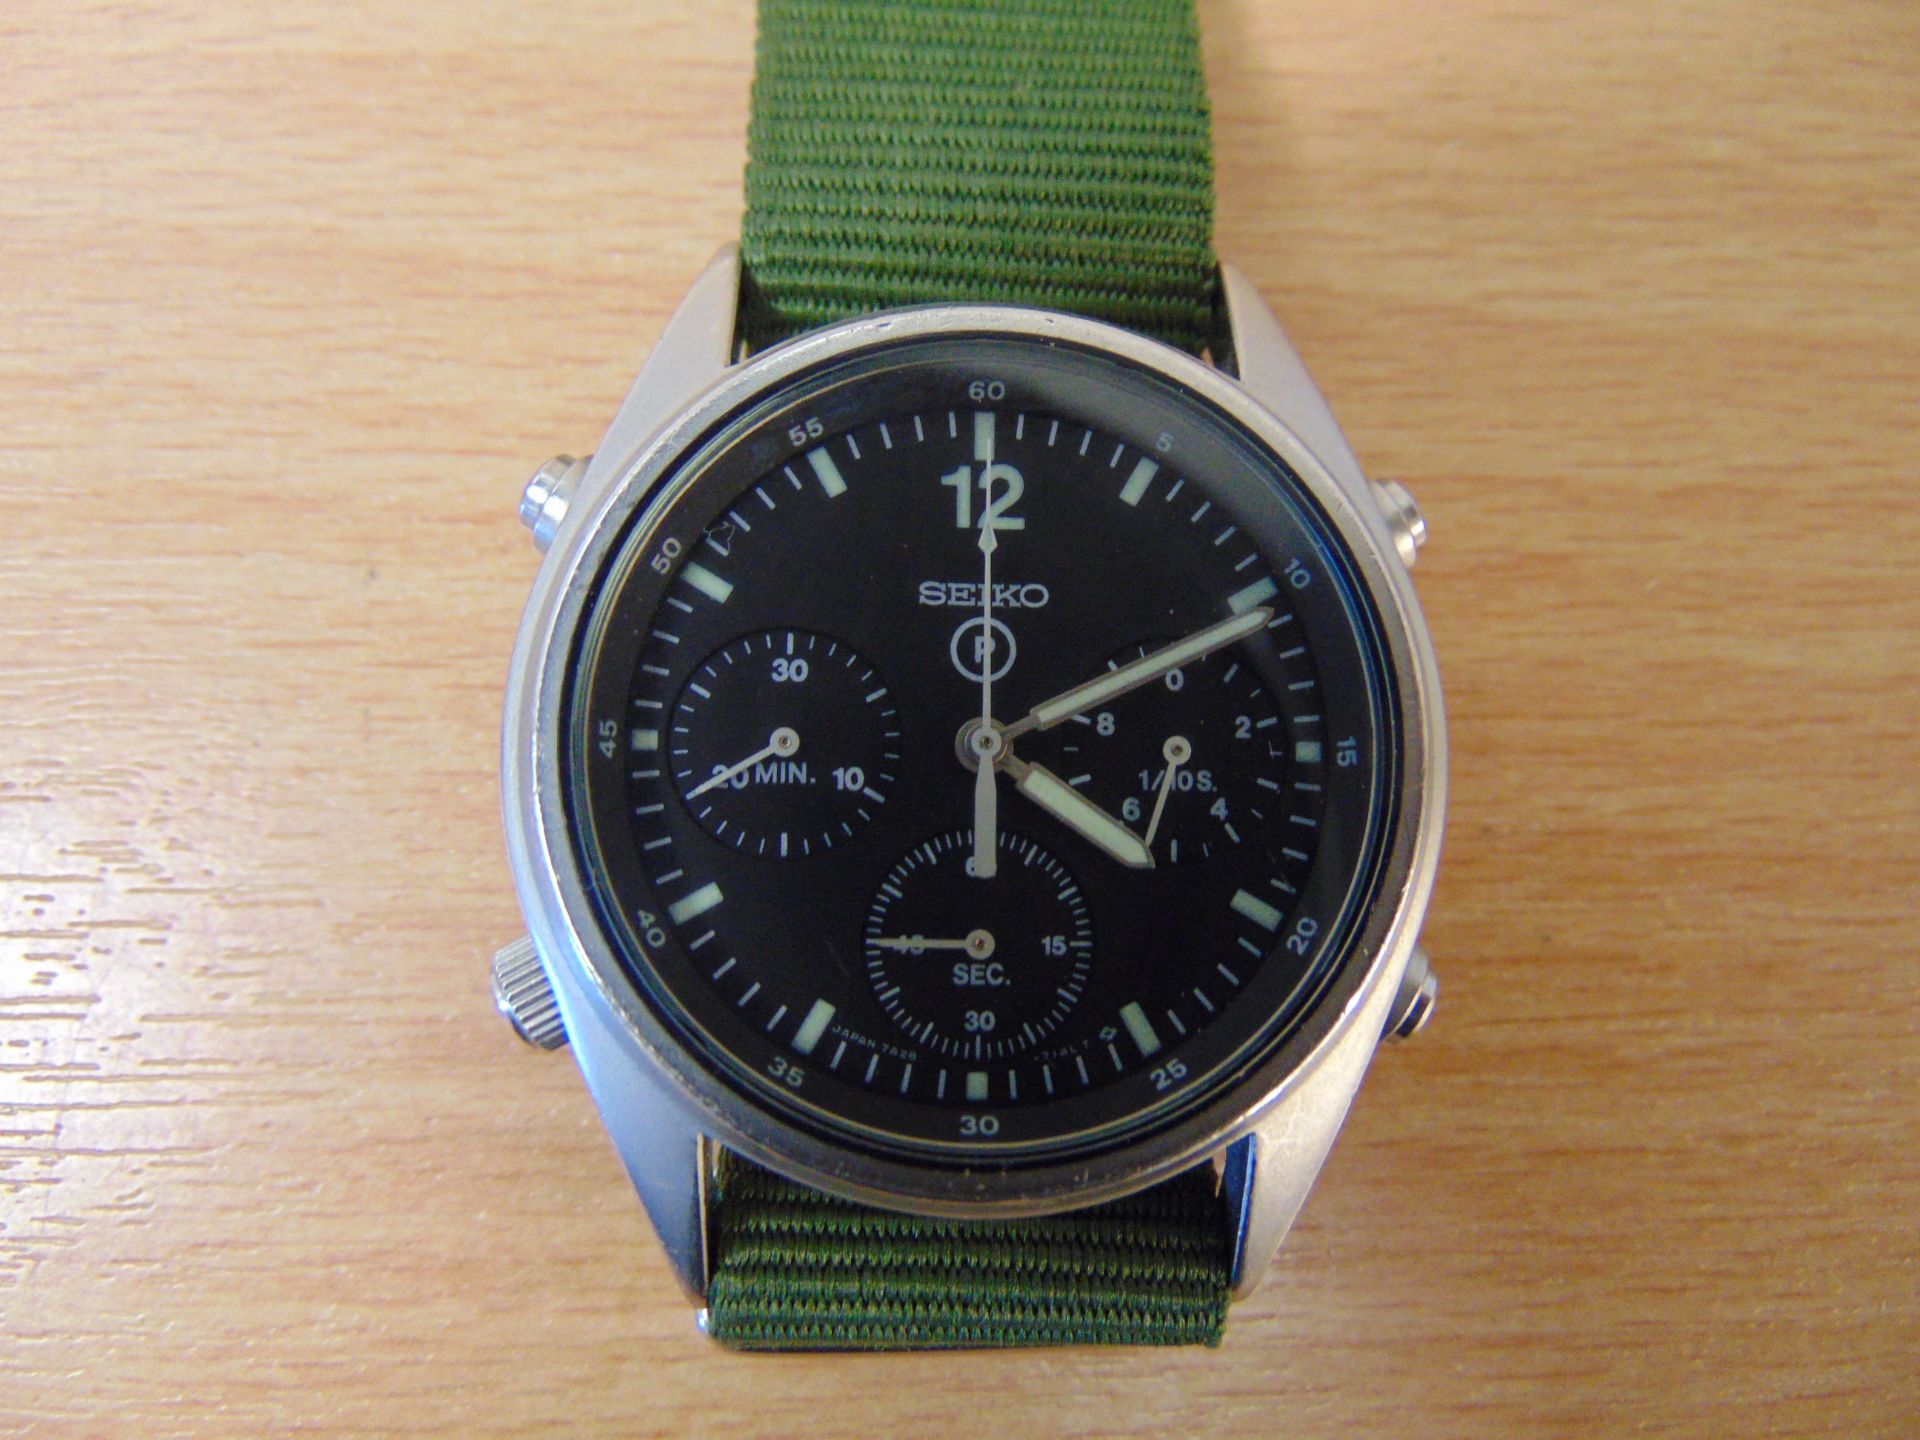 A Very Nice Gen 1 Seiko Pilots Chrono RAF Harrier Force Issue Nato Marks Dated 1990 (Gulf War)